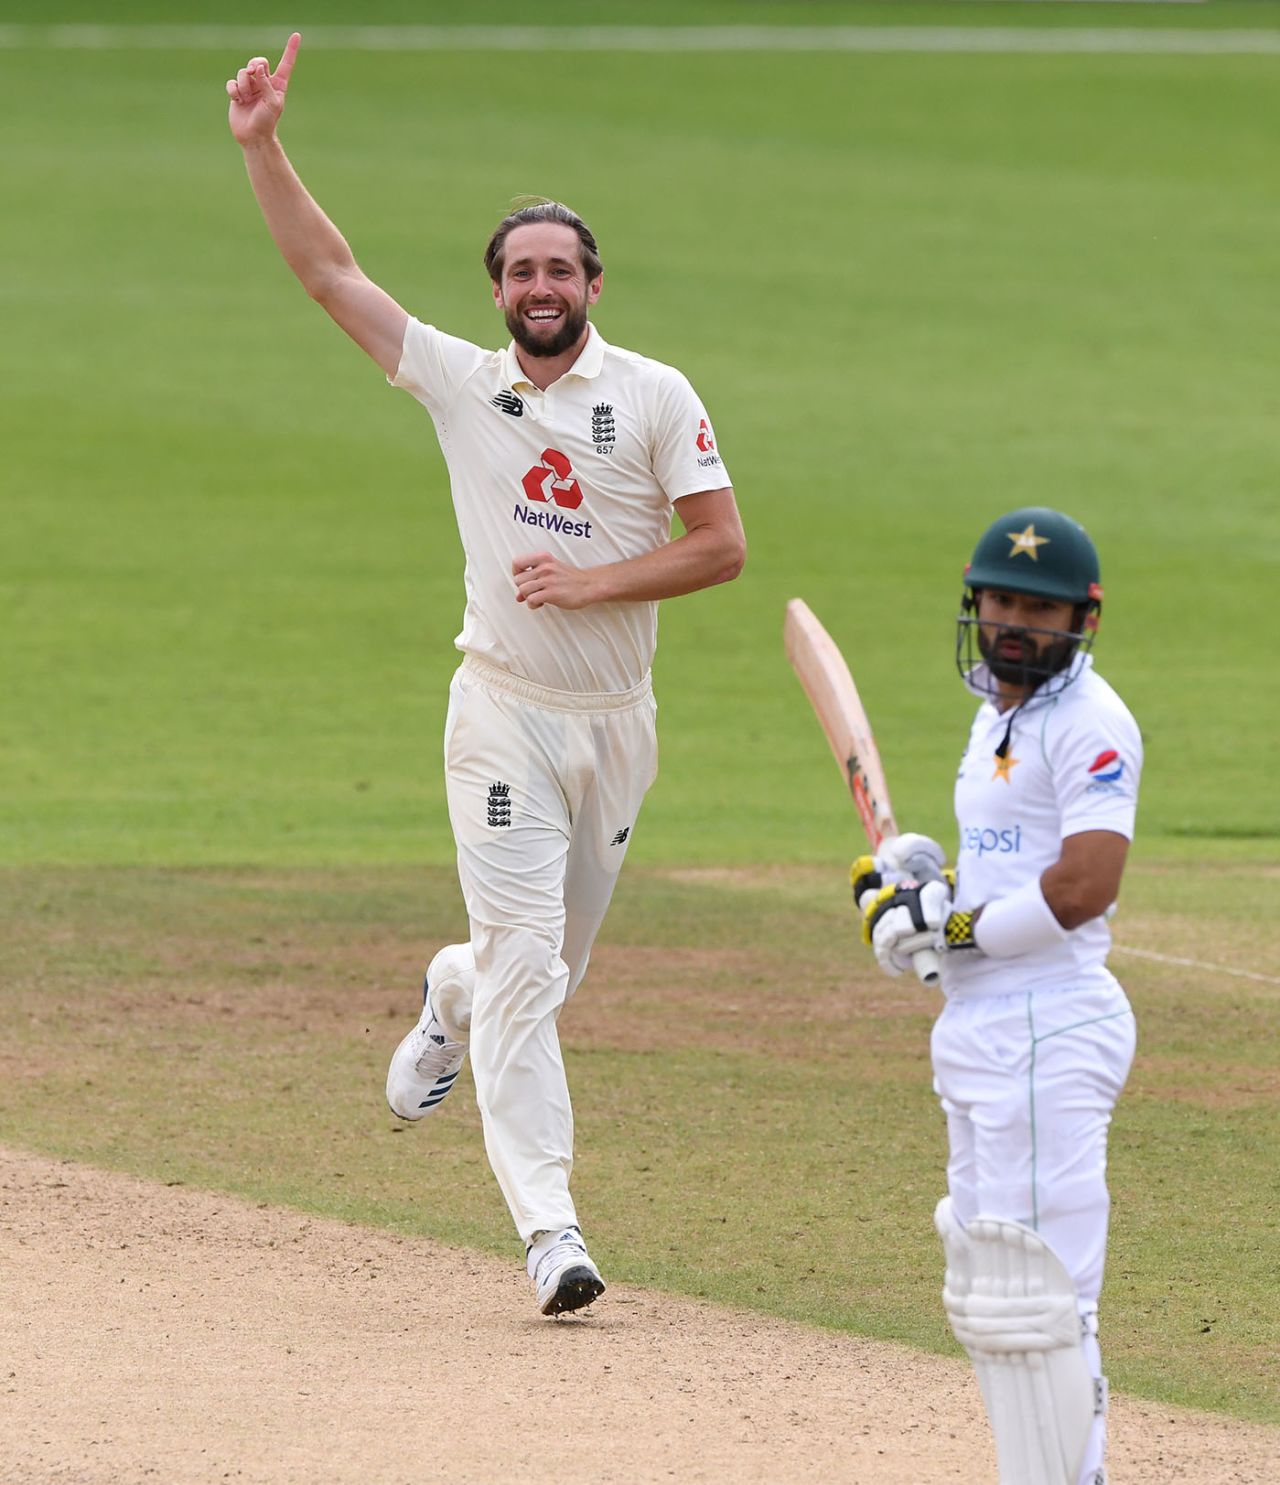 Chris Woakes claimed the wicket of Mohammad Rizwan, England v Pakistan, 3rd Test, Southampton, 3rd day, August 23, 2020